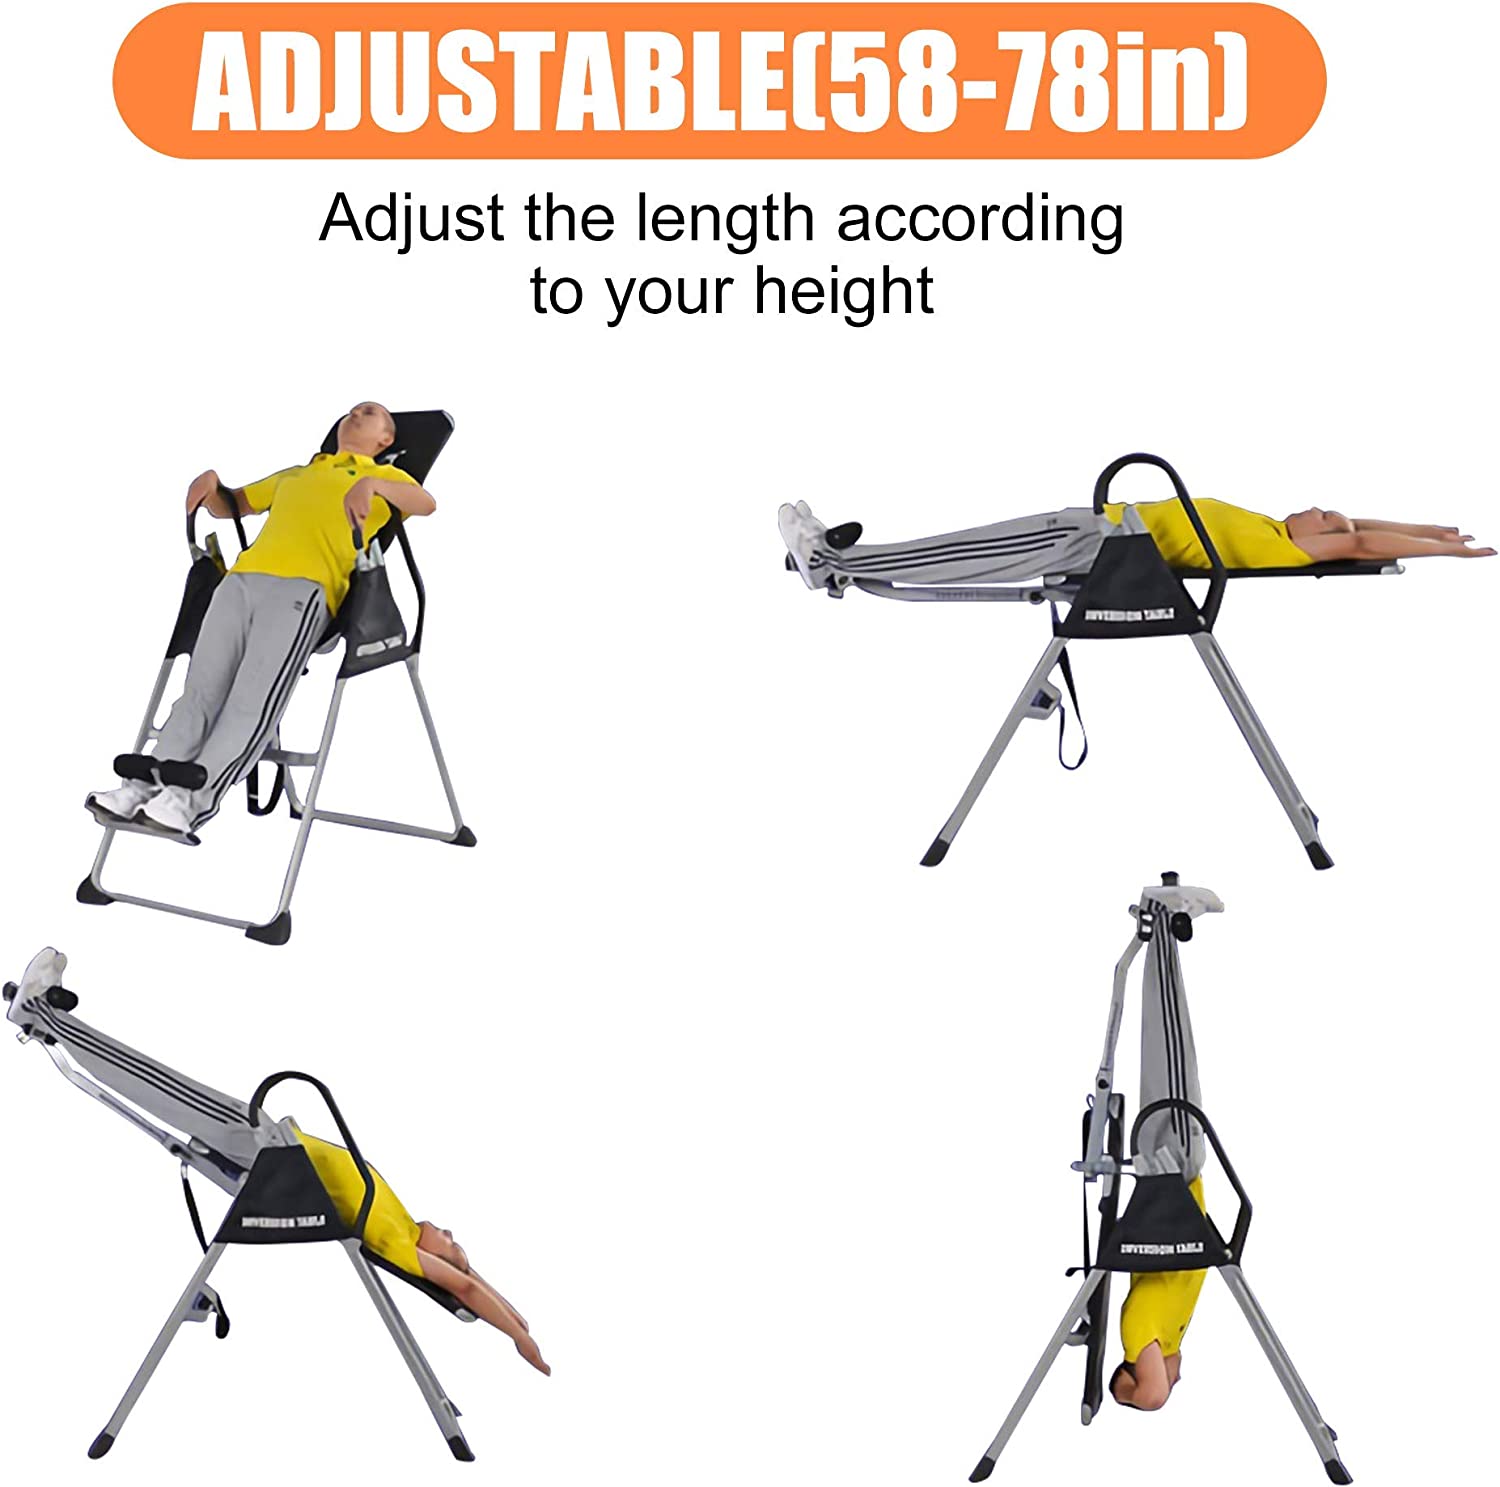 (Out of Stock) Inversion Bed, Adjustable Inversion Table, Foldable Inversion Stretcher, Inversion Stand